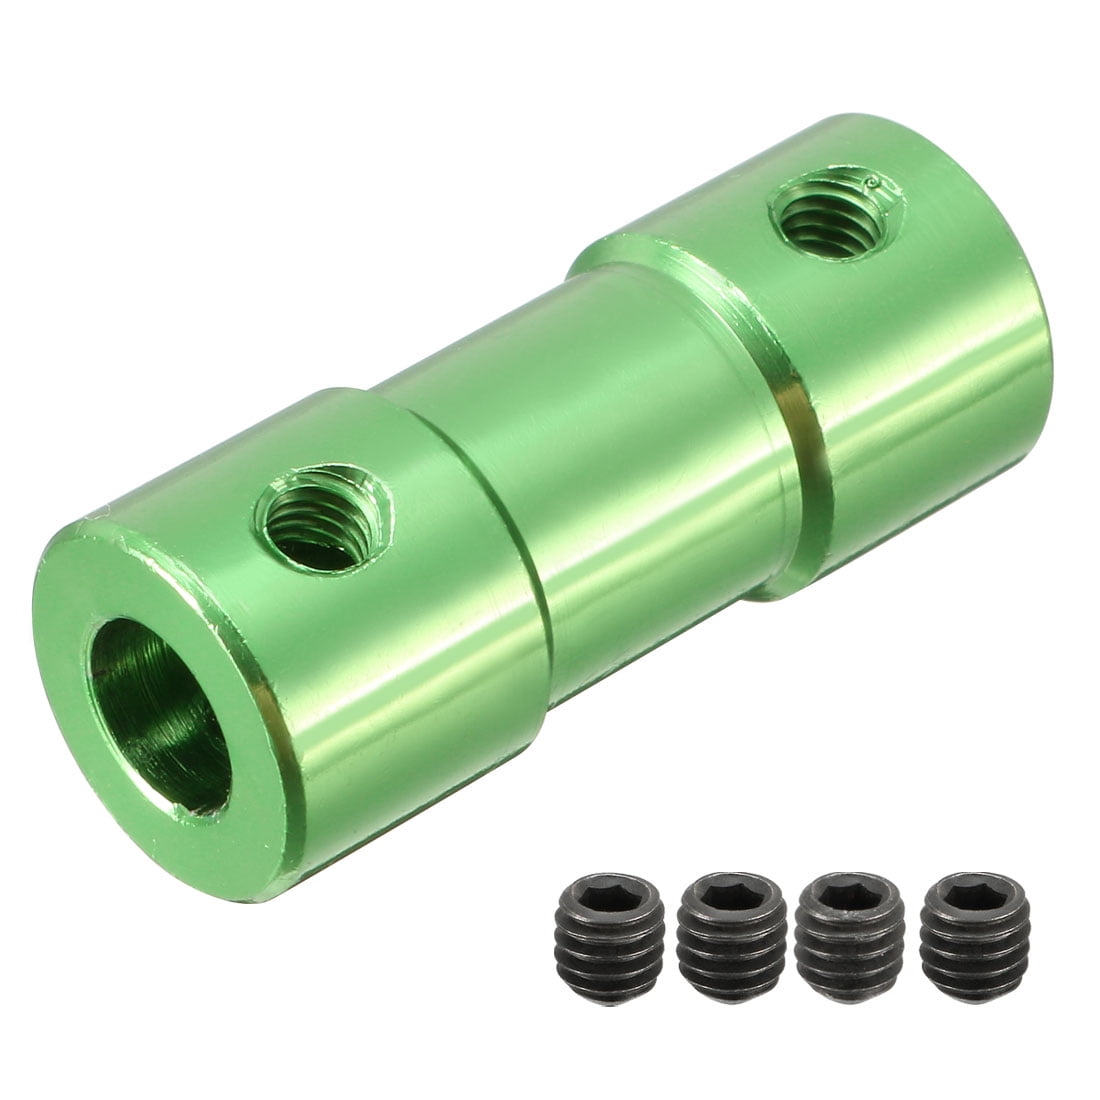 uxcell 2 PCS 3.17mm to 3.17mm Rotatable Universal Steering Shaft Coupler Motor Connector Joint Coupling L23XD9 